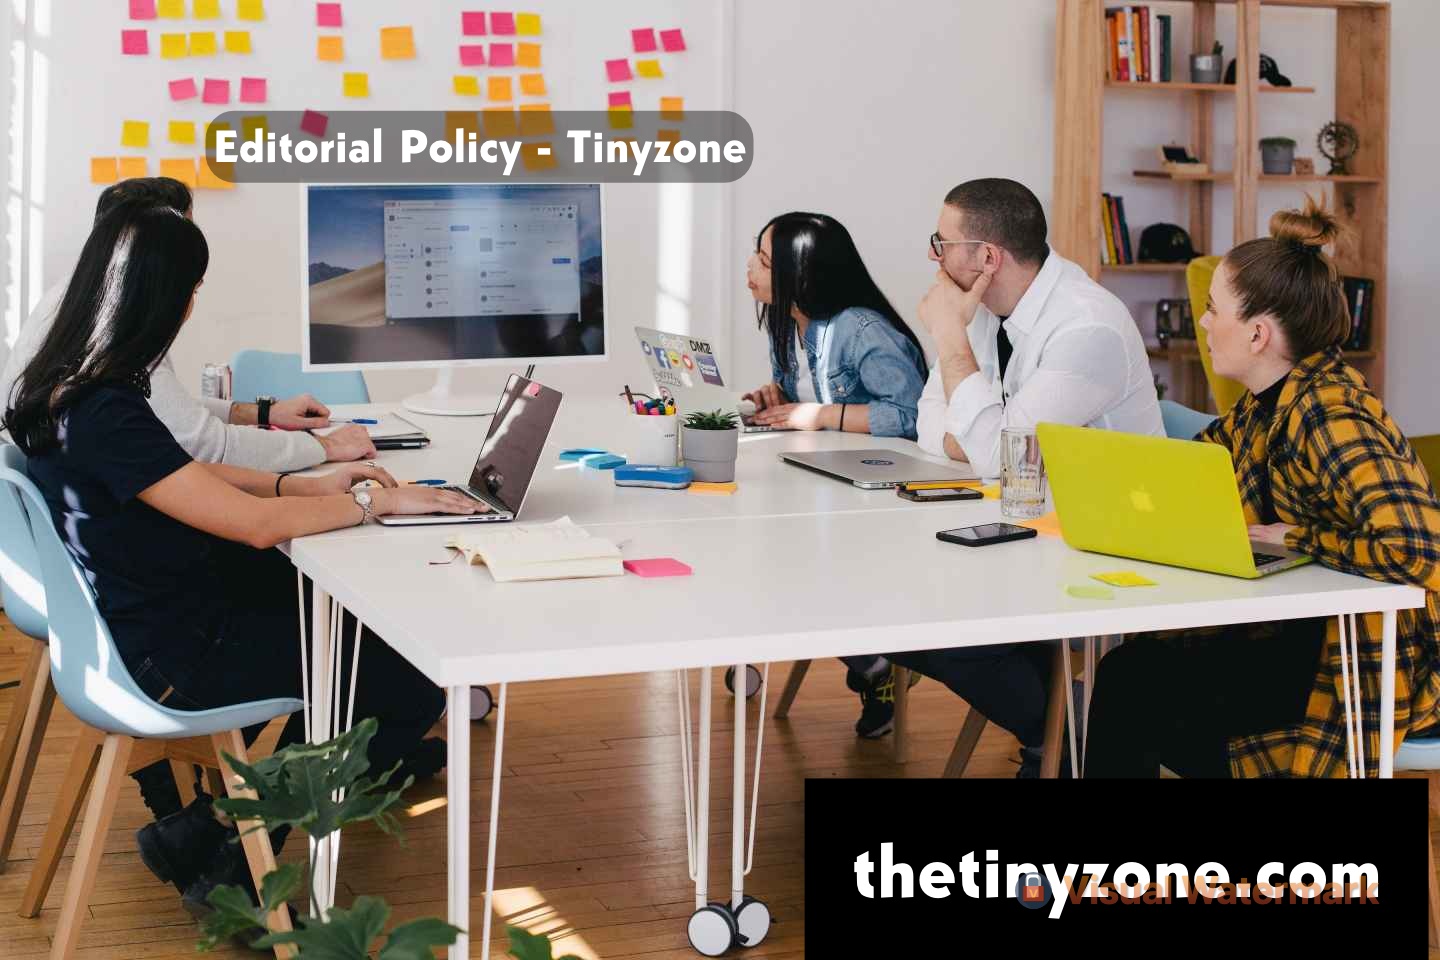 Editorial Policy - Tinyzone